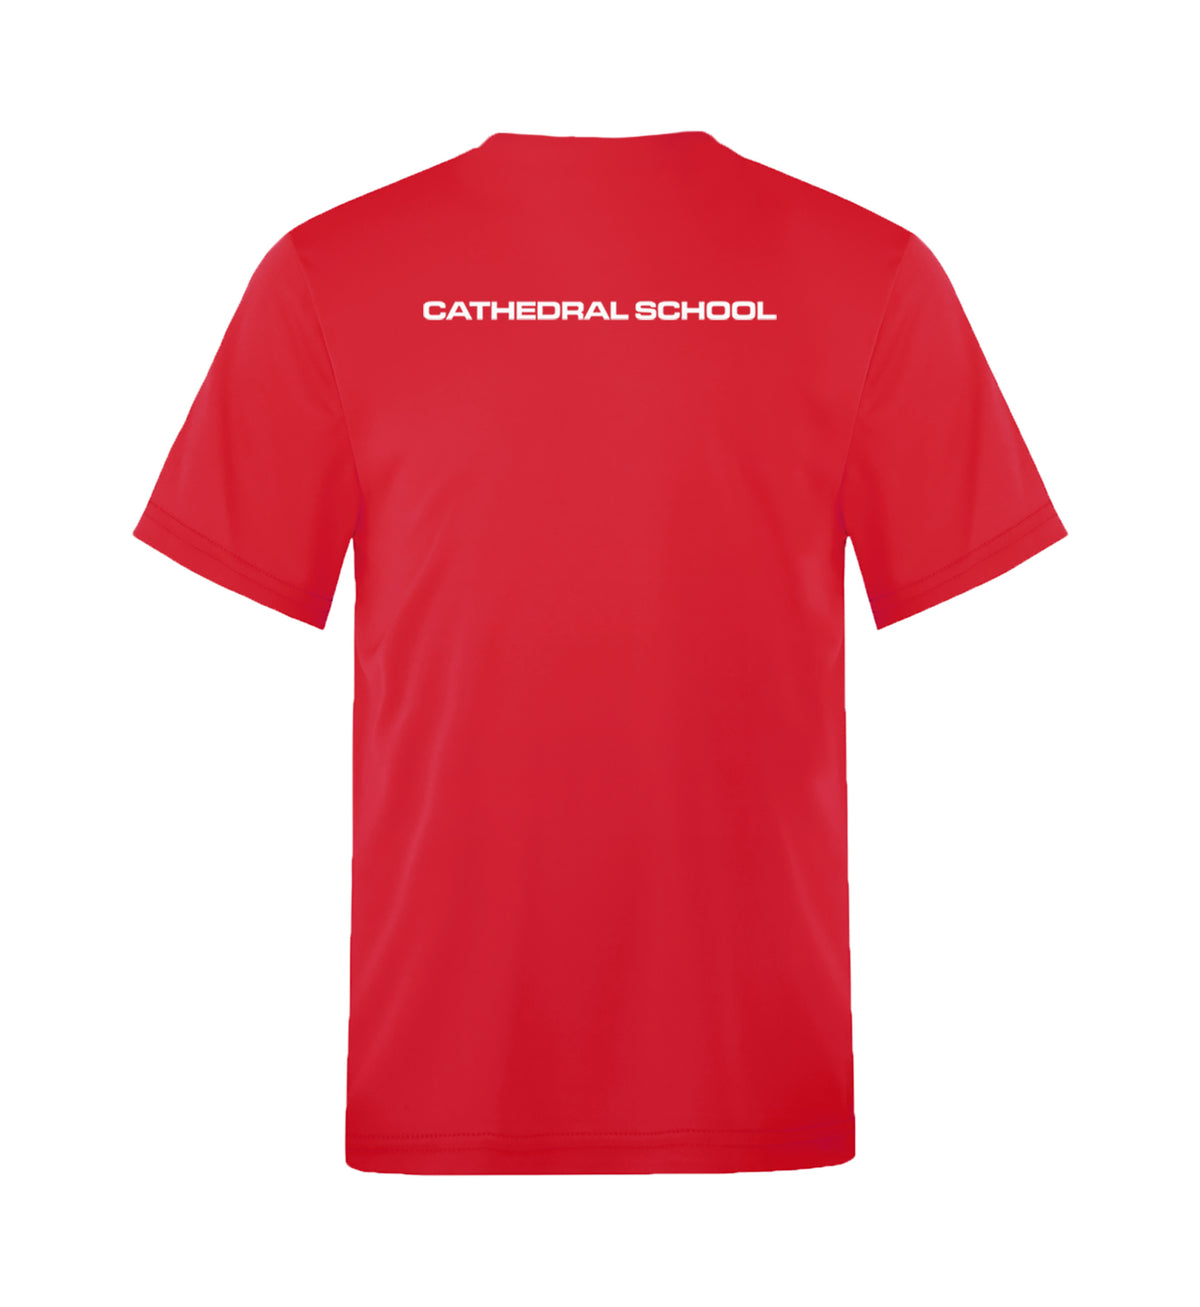 CATHEDRAL GYM T-SHIRT, WICKING, ADULT